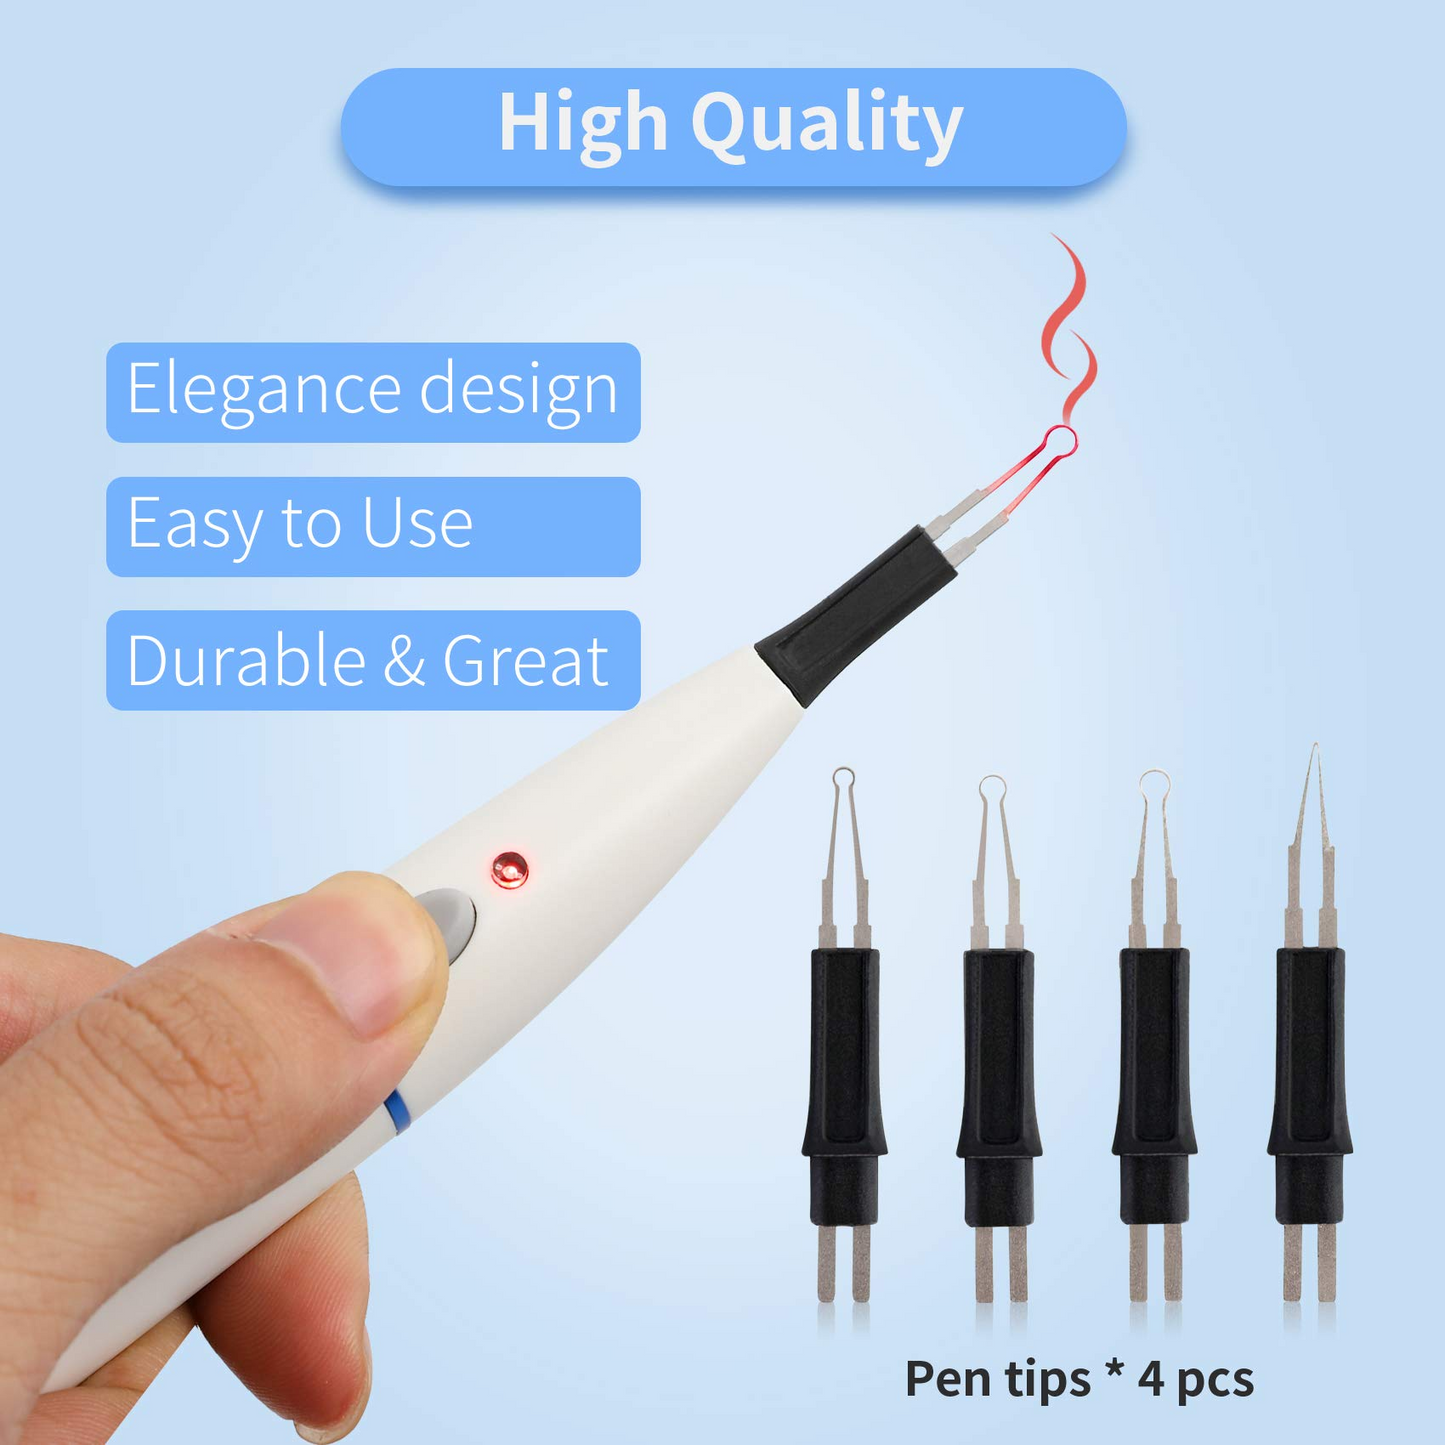 Gutta Percha Point Cutter with 4 Tips, Dental Tooth Gum Endo Obturation System with Heated Pen, Dentist Breaker Cutter Tools